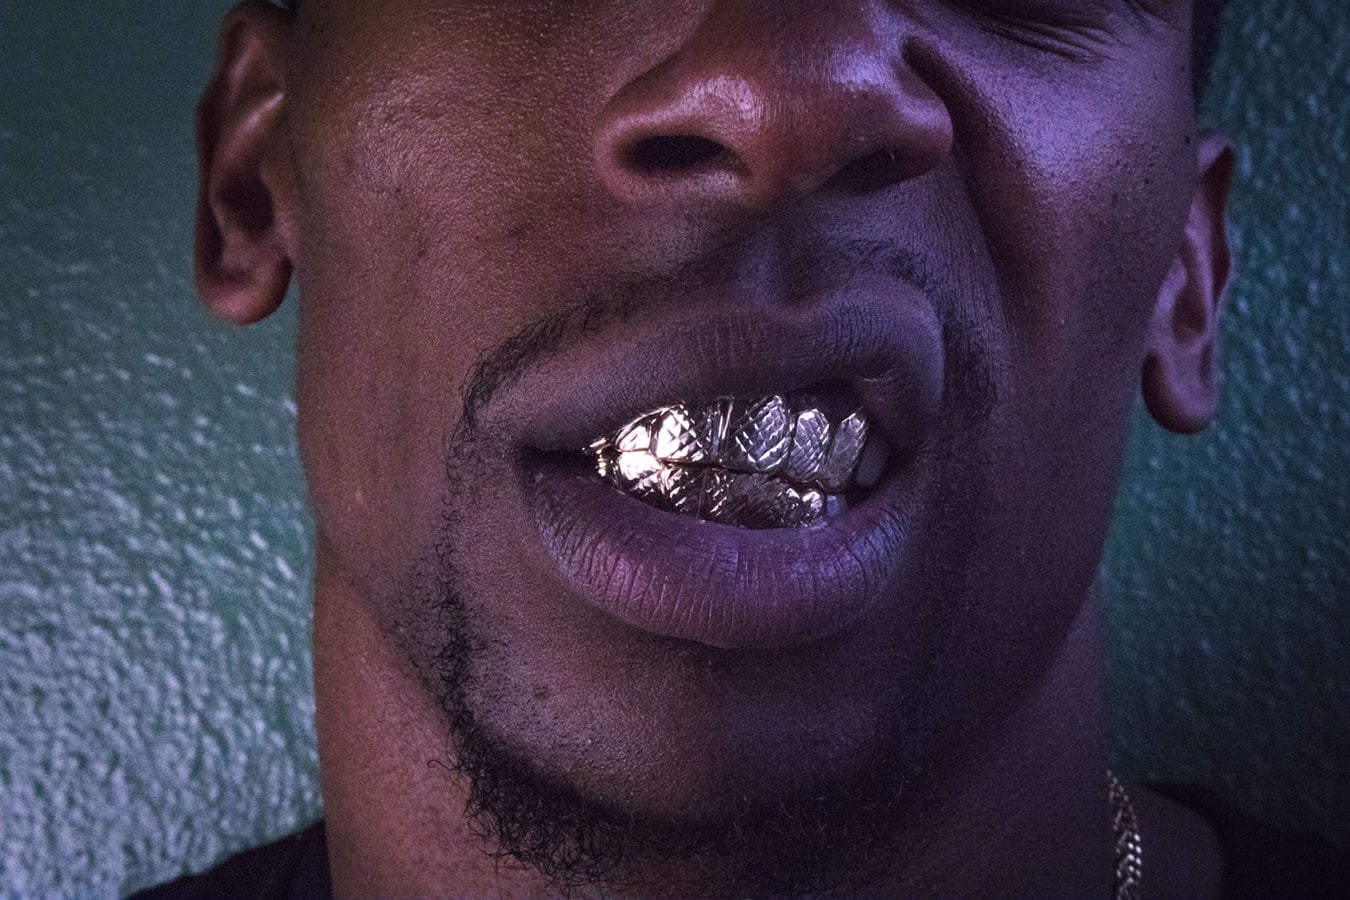 halen stoomboot Kalmerend What Are Grillz? – The Hip-Hop Fashion Trend That's on the Rise